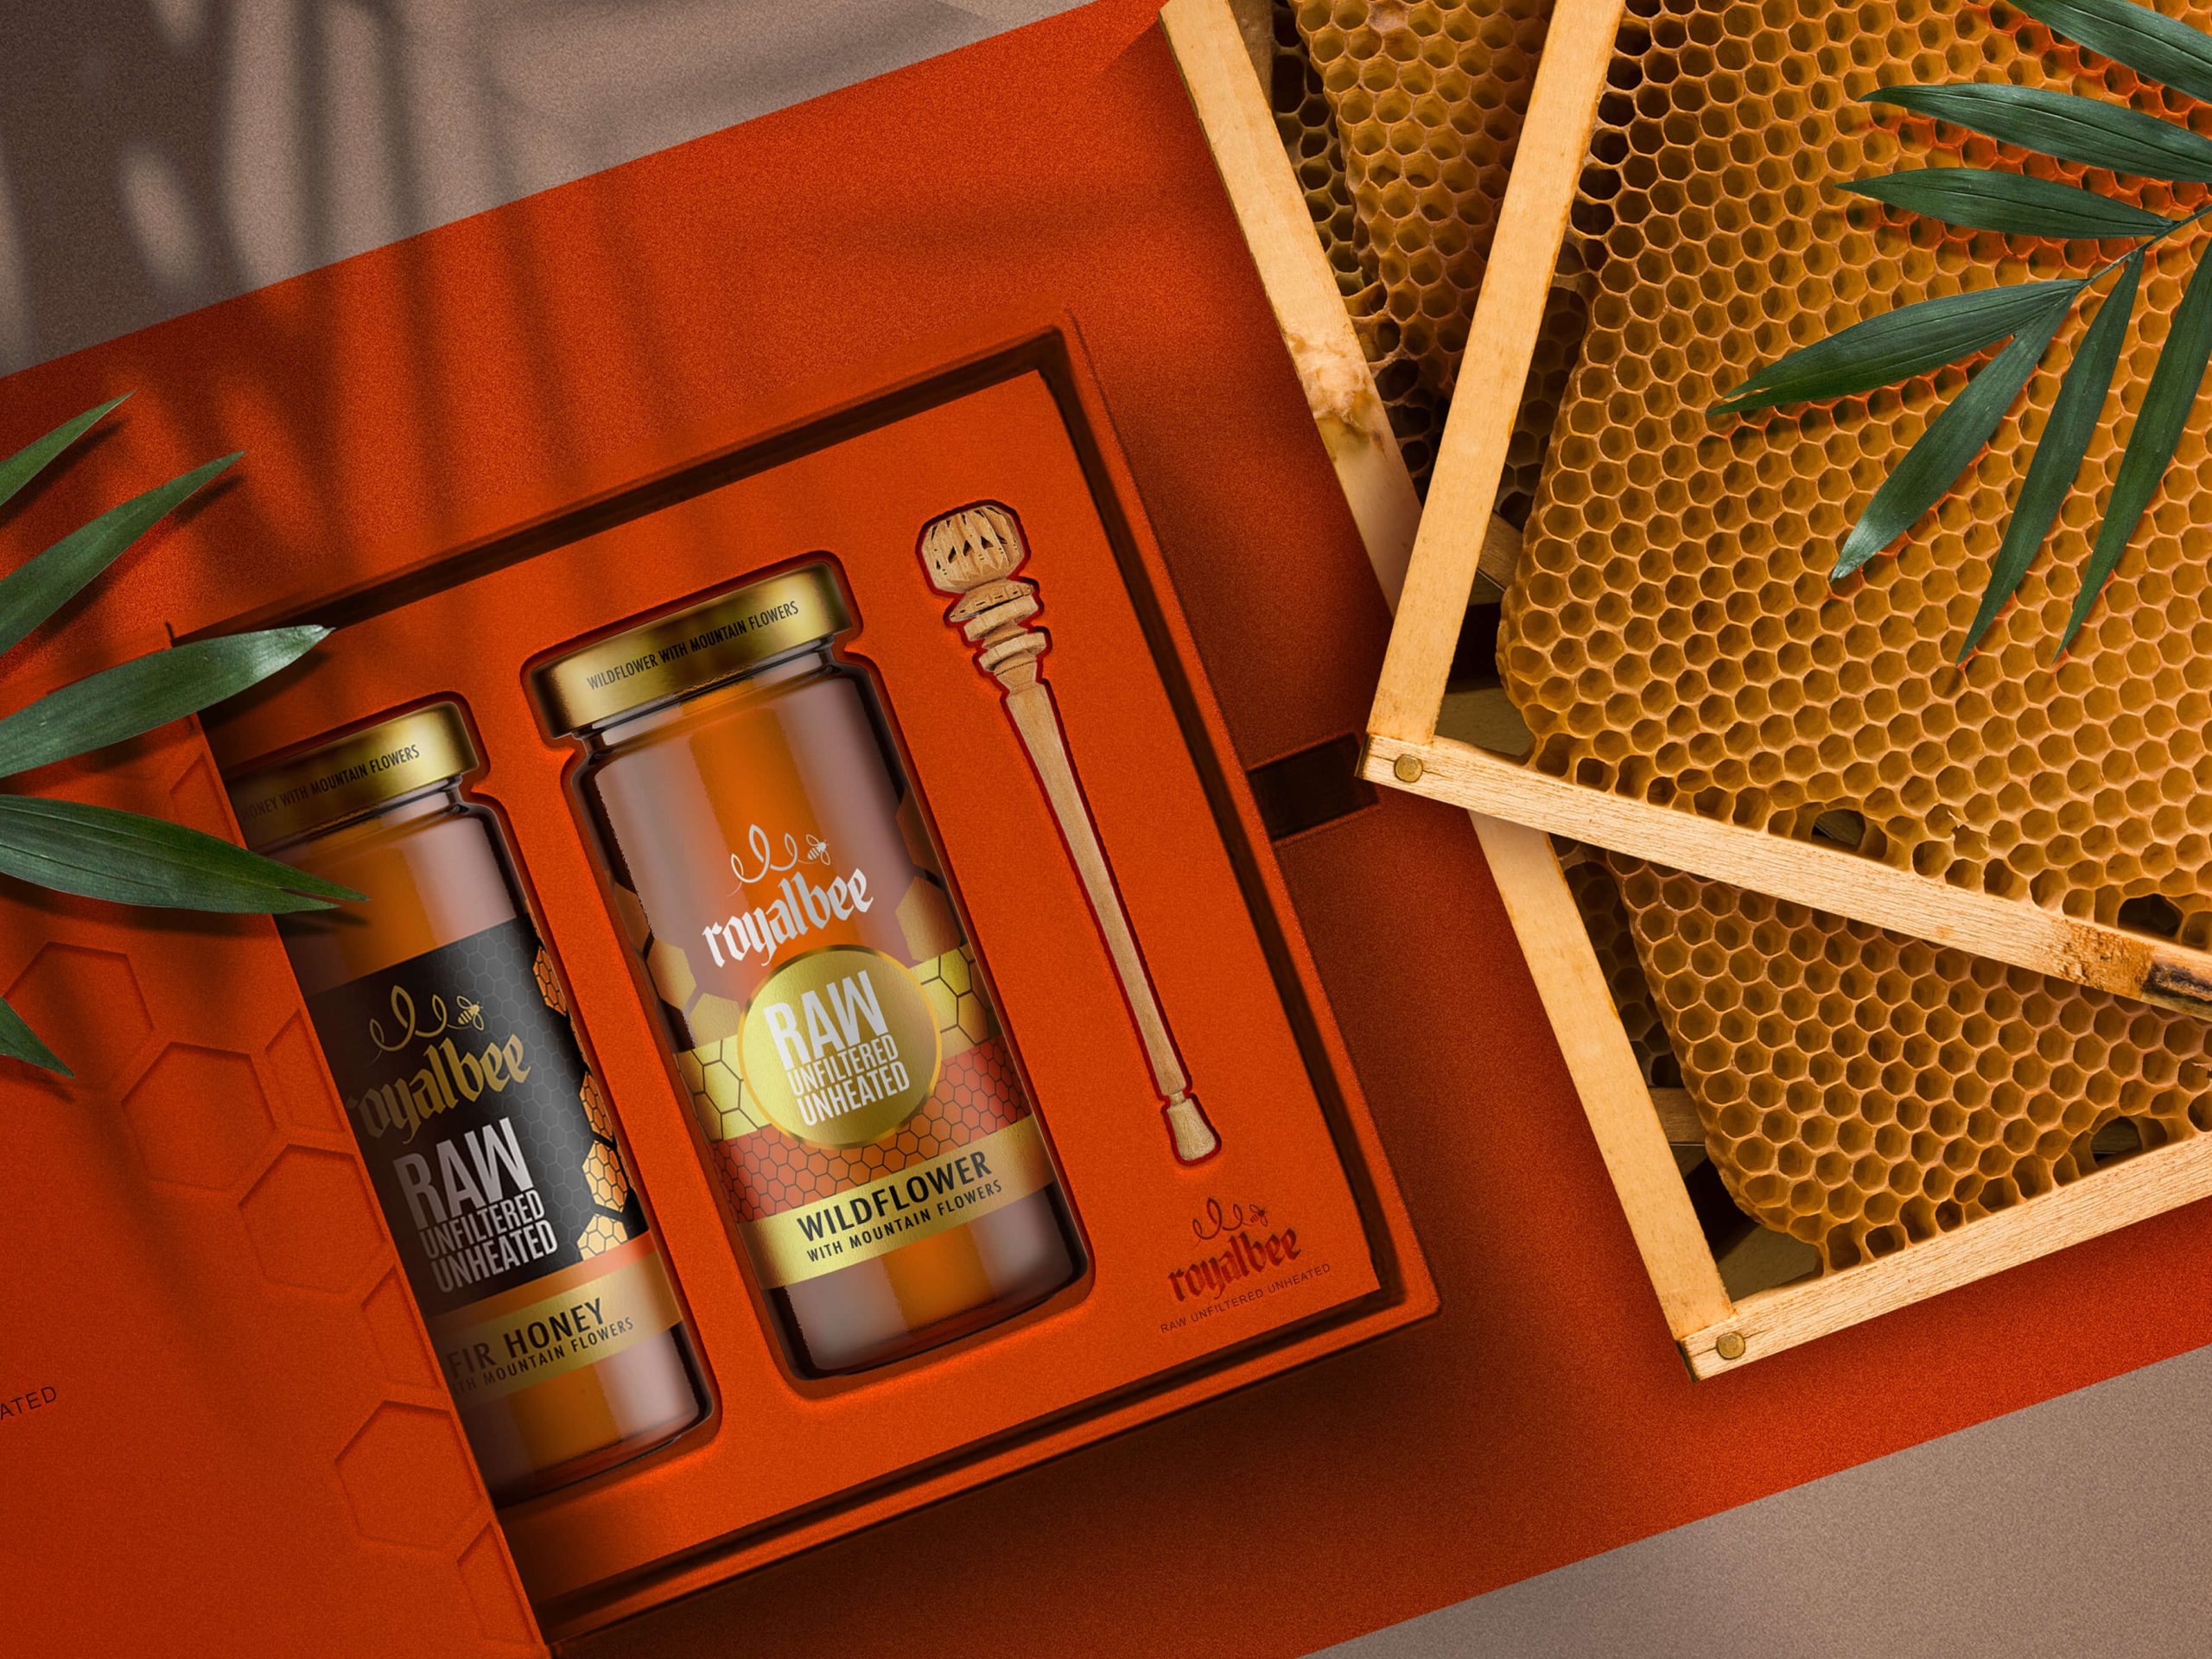 The packaging design for Royal Bee Honey by Green Fields in London was created with a color scheme that reflects the natural beauty of the product. The use of black, gold, white, and orange was chosen to complement the various honey colors. This design choice not only adds visual appeal, but it also communicates the premium quality of the product. Additionally, a gift box was created to showcase two different honey flavors and include a honey dripper, providing a complete and thoughtful experience for the customer. Overall, this packaging design captures the essence of the brand and the product it represents, effectively communicating its quality and value to potential buyers.